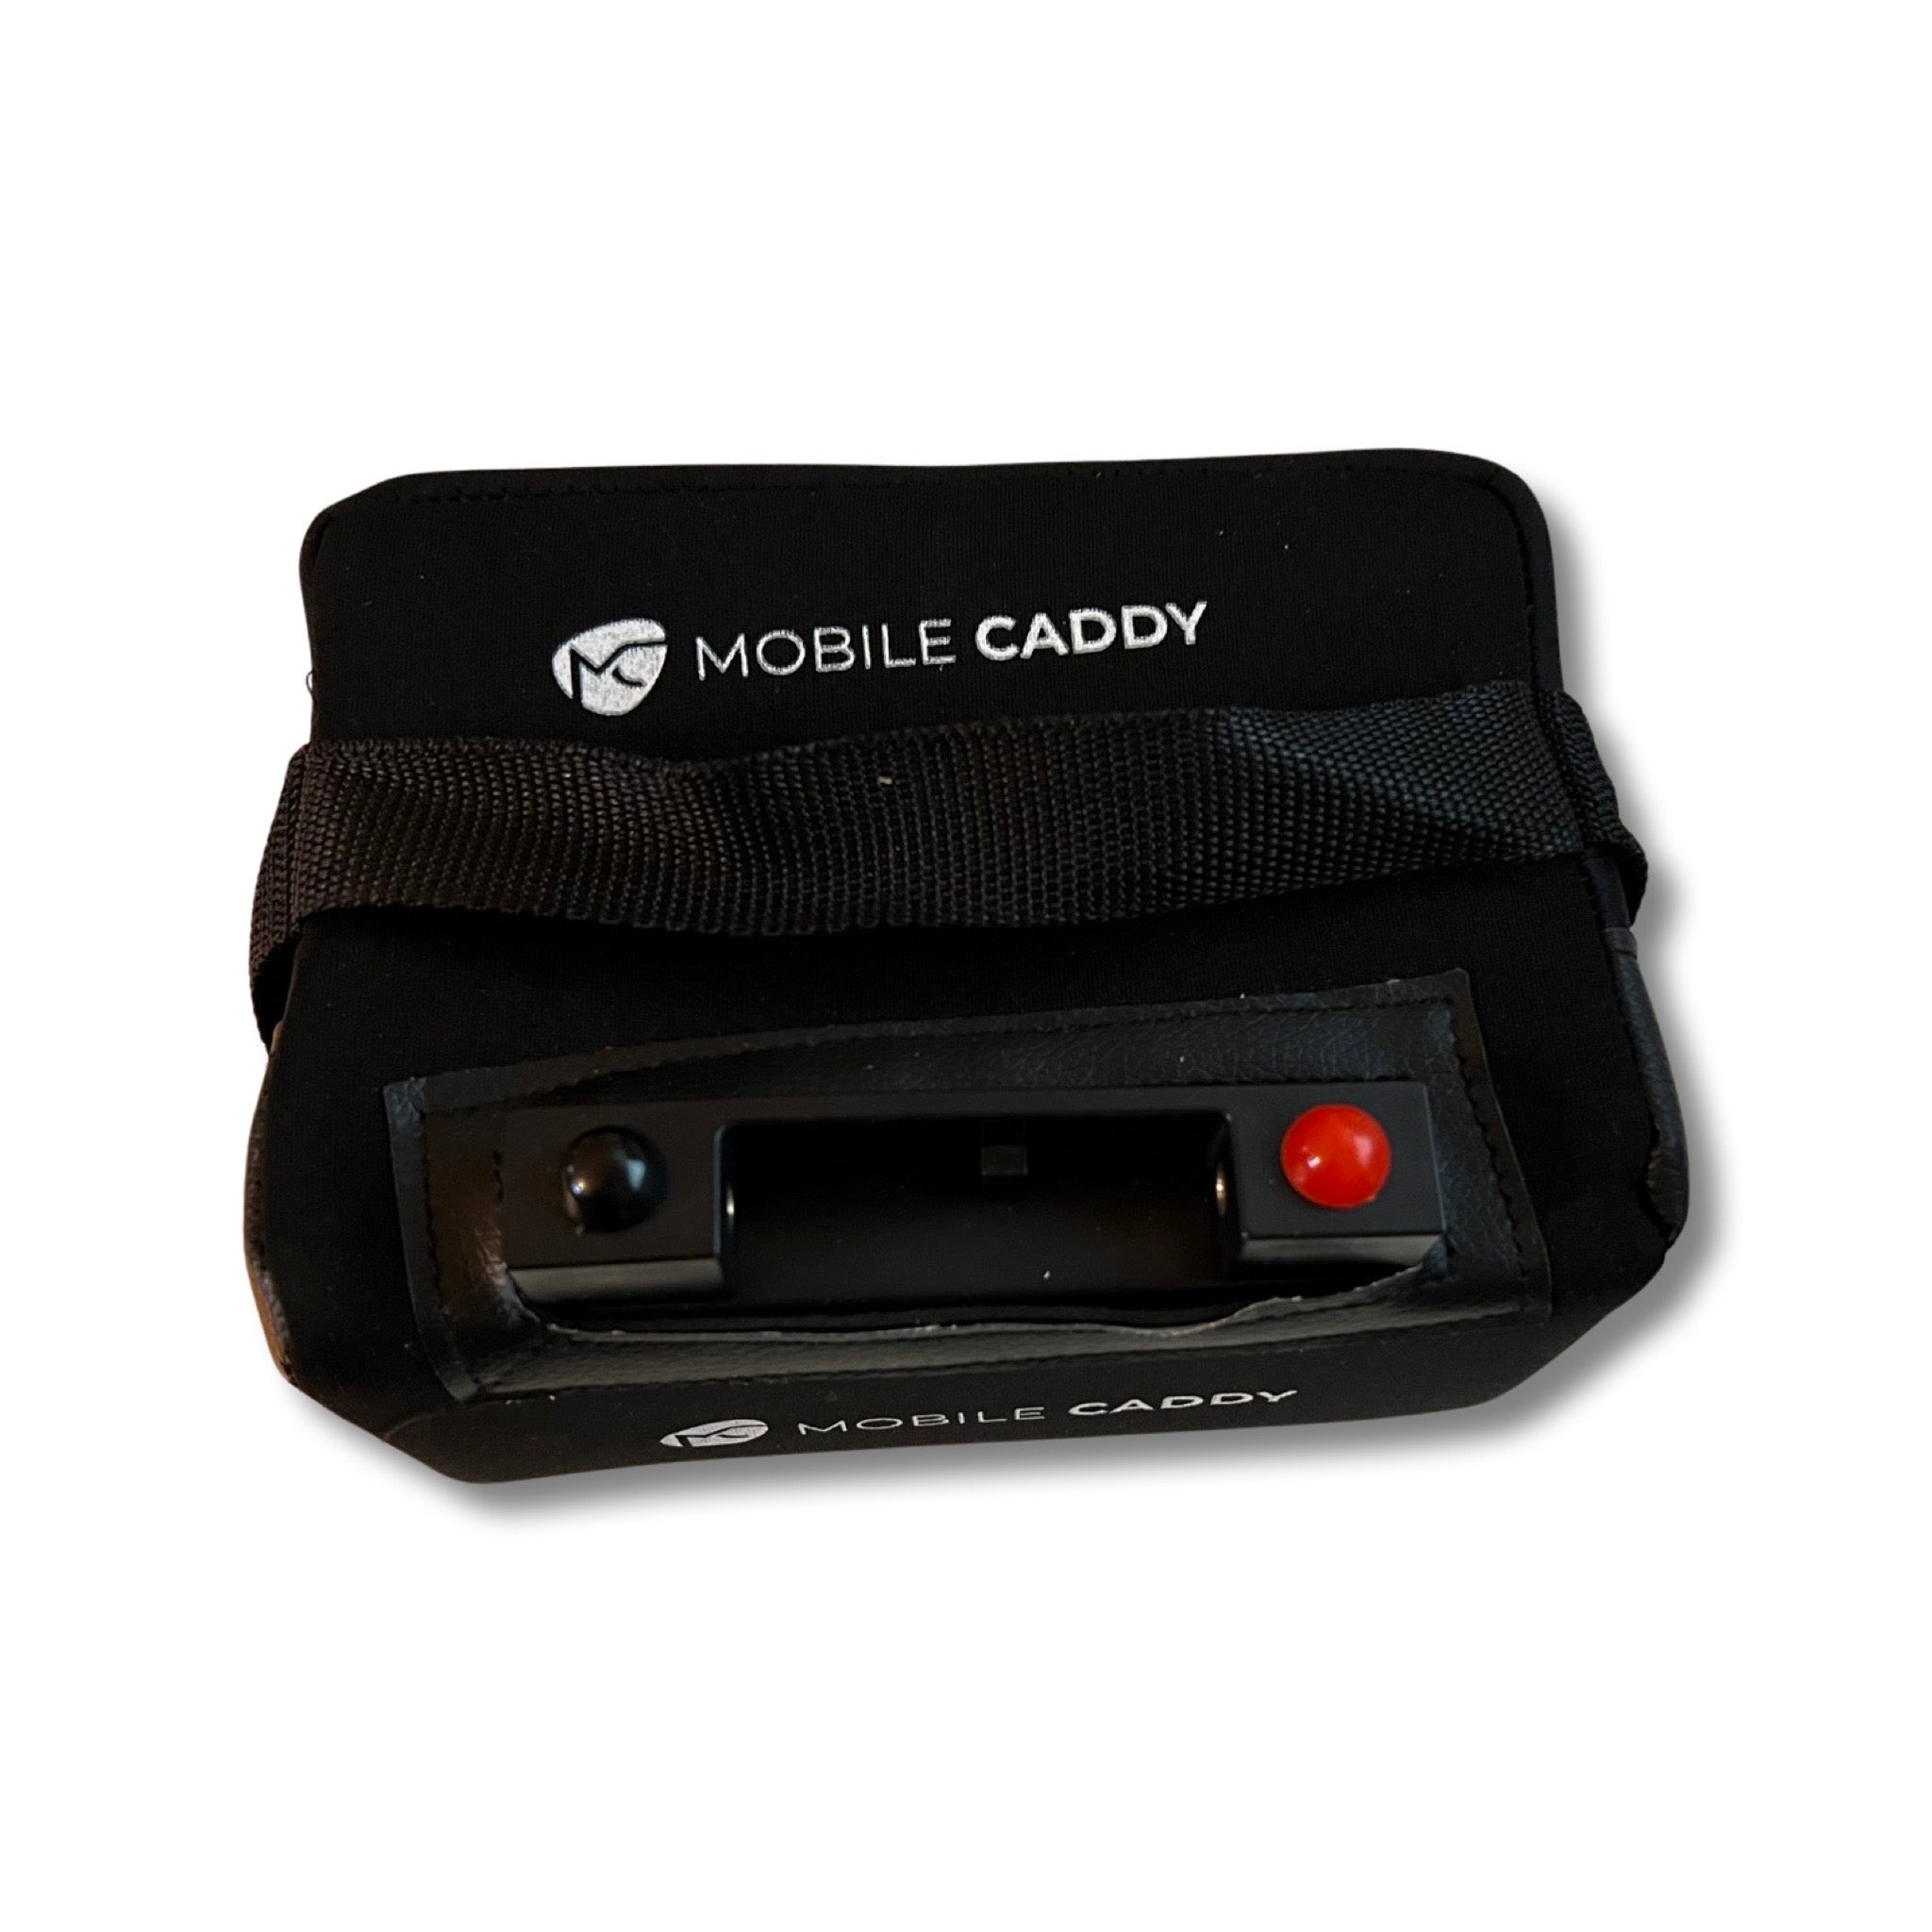 Lithium Battery for MobileCaddy GT series golf trolley